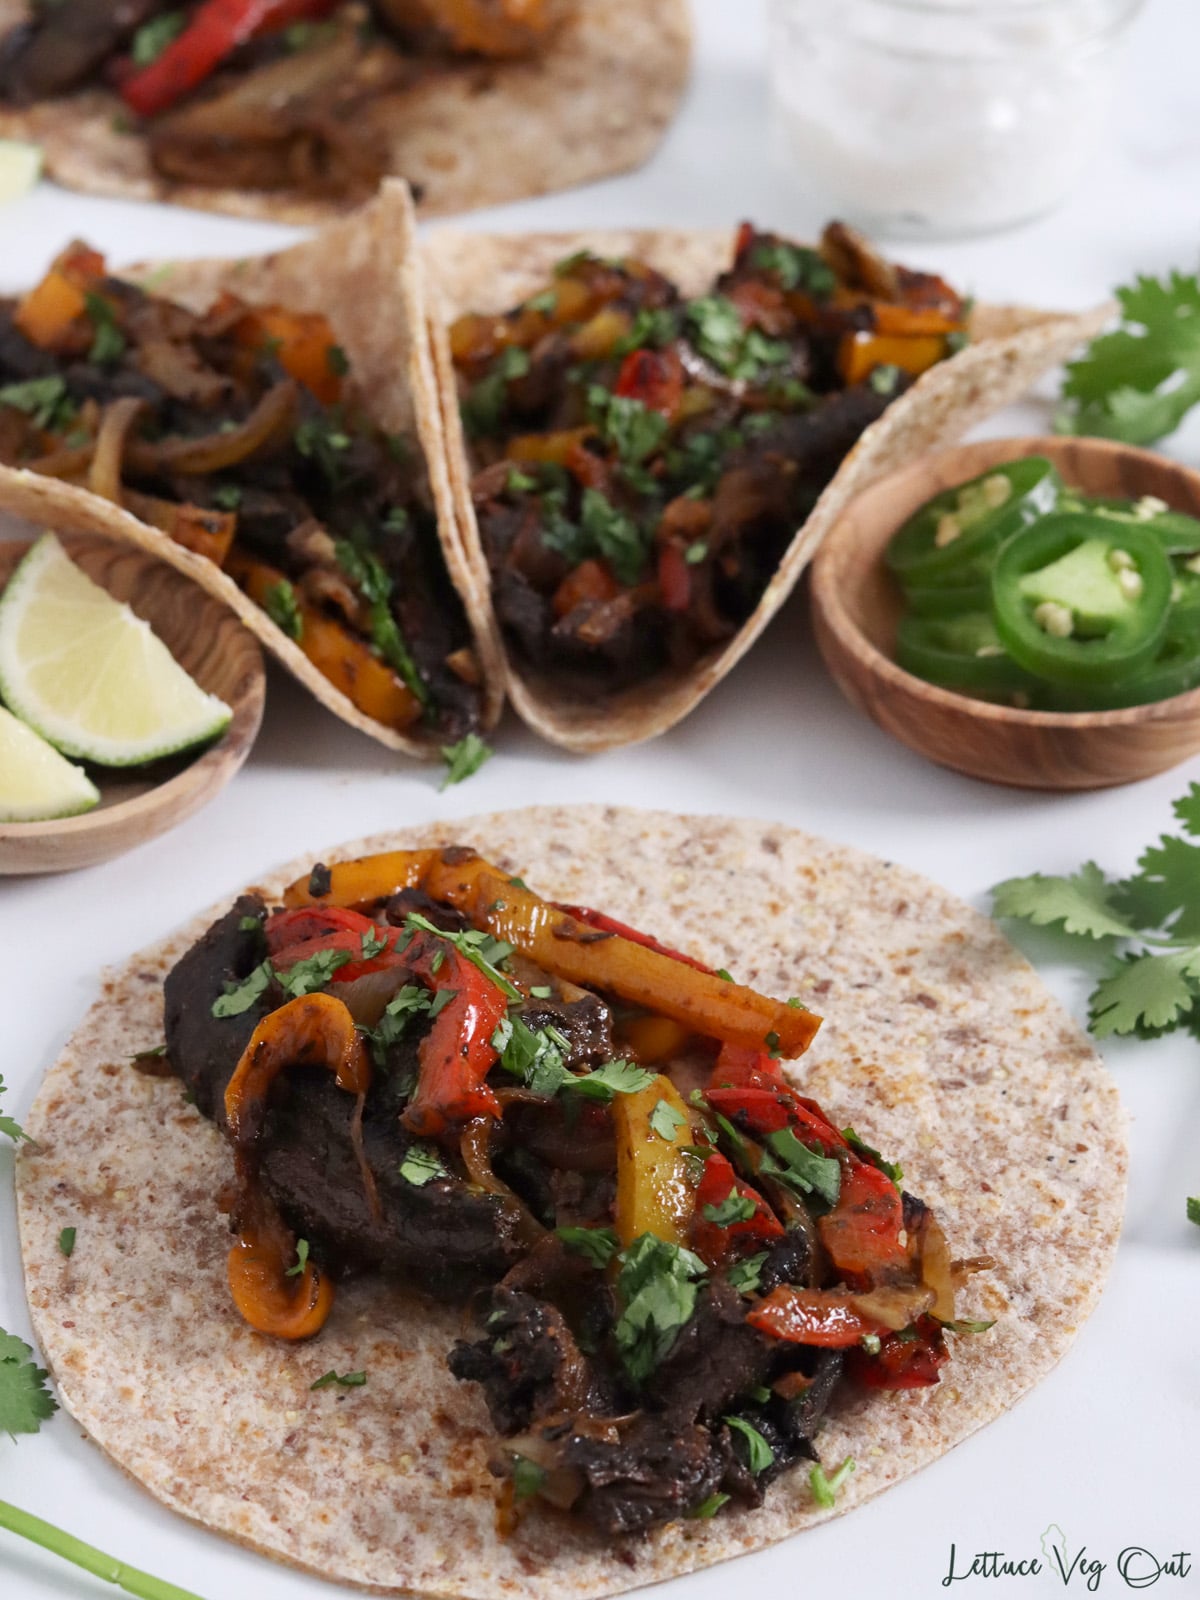 Small tortilla topped with cooked fajitas vegetables (mushroom, onion, pepper) and cilantro garnish.